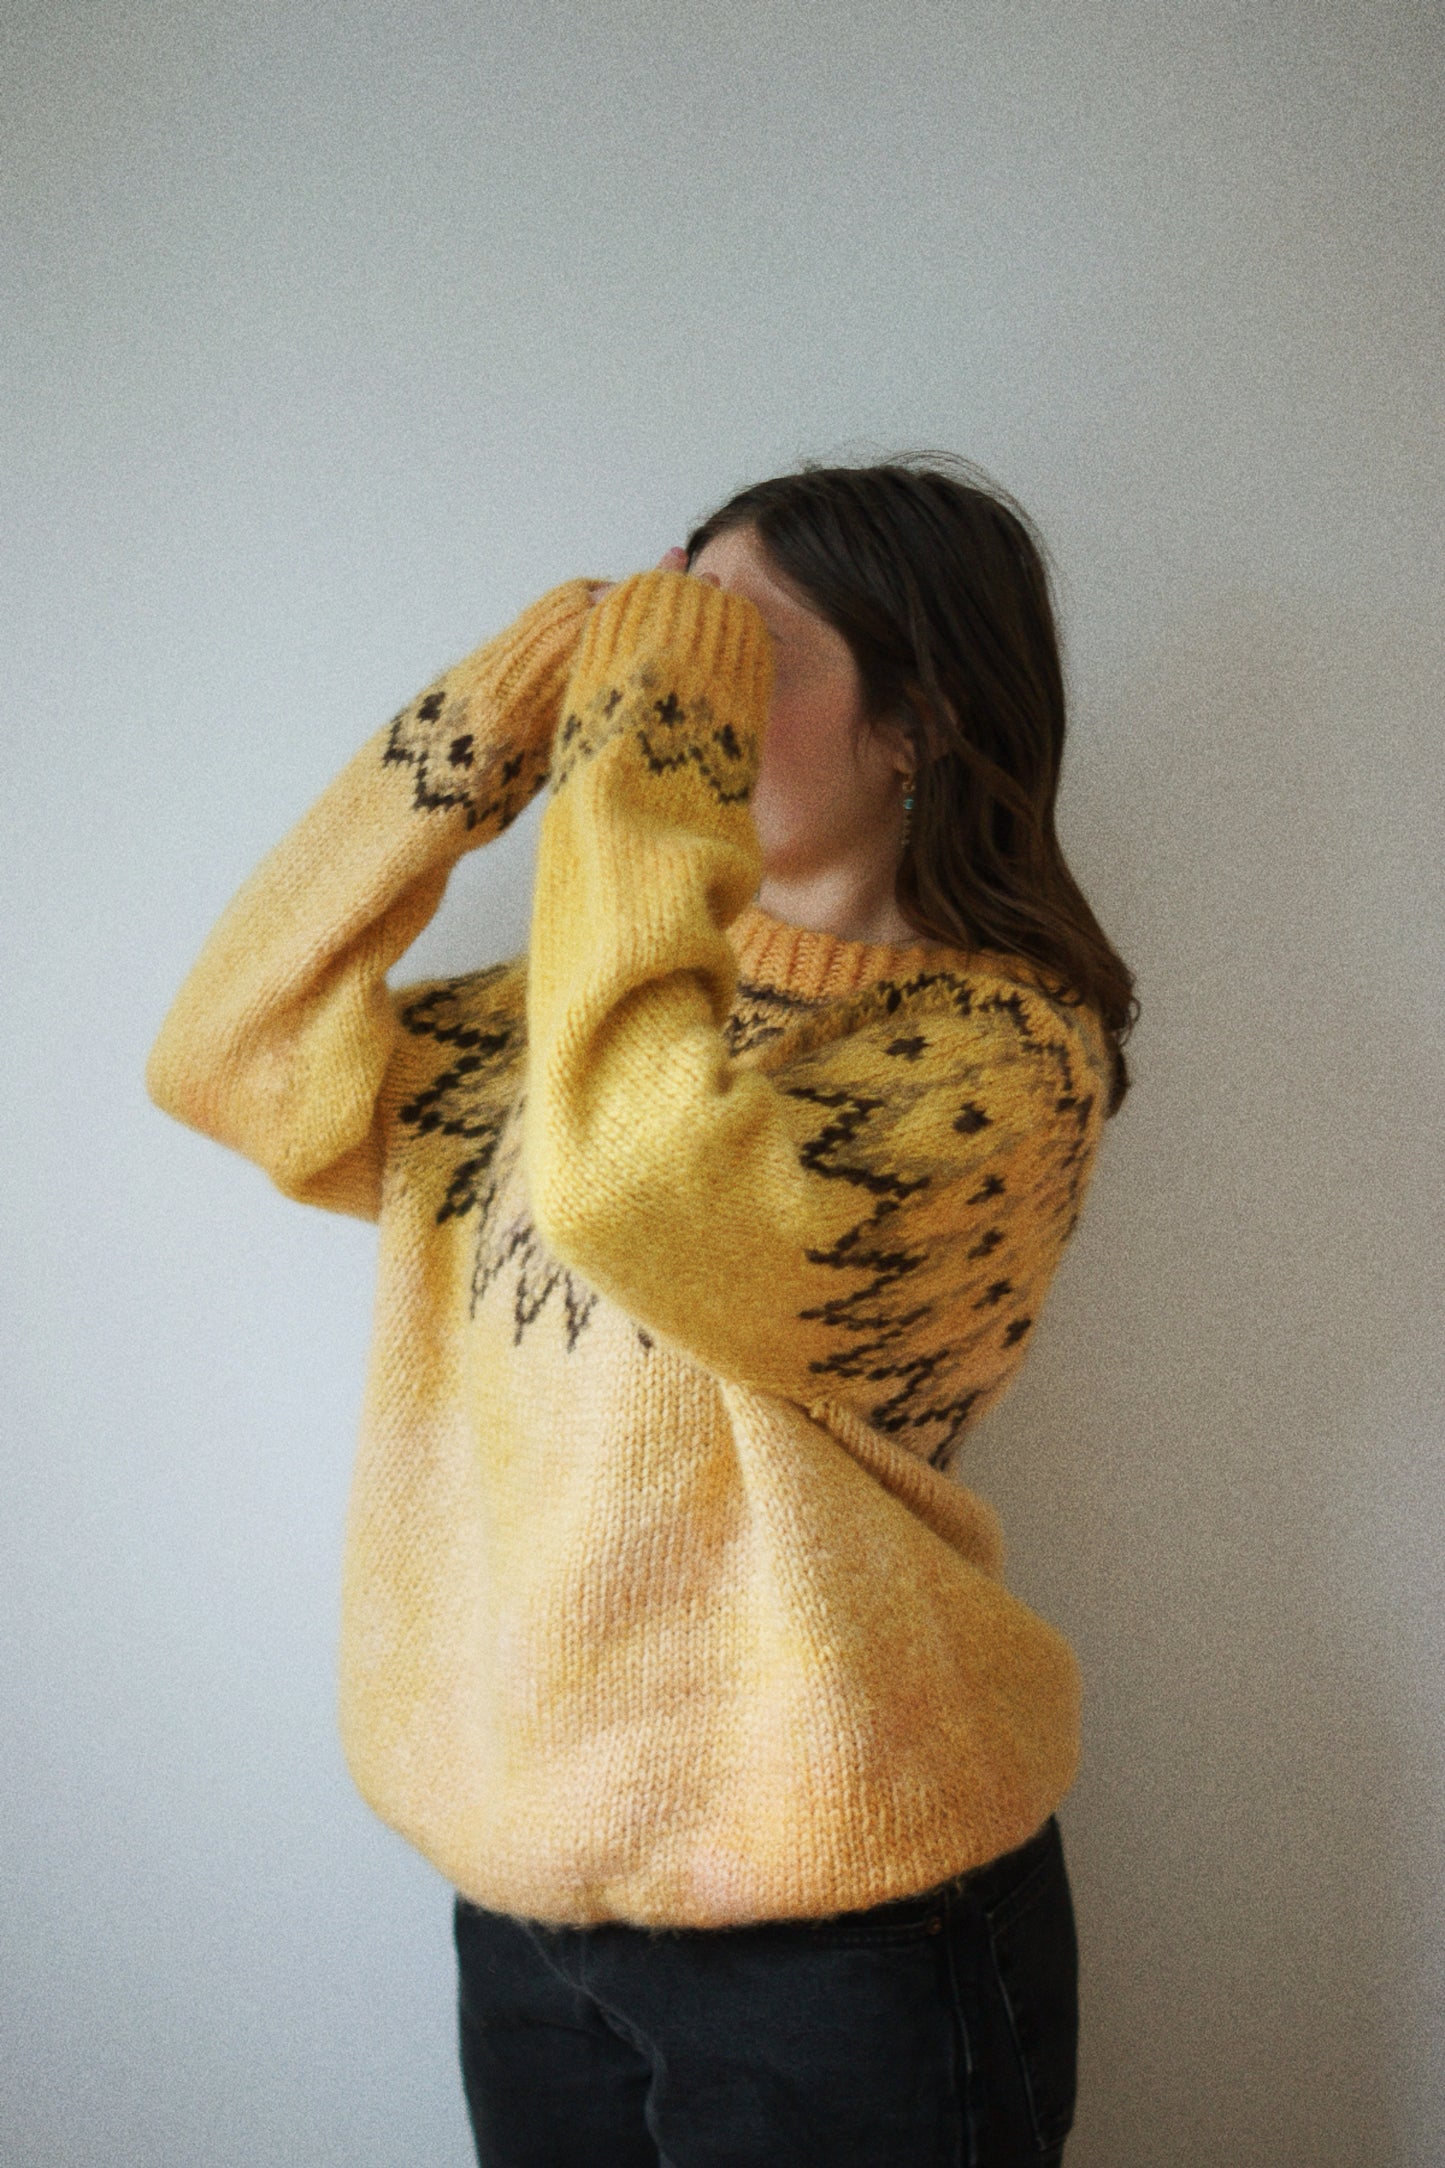 Madder Root + Marigold Dyed Wool Sweater - L/XL